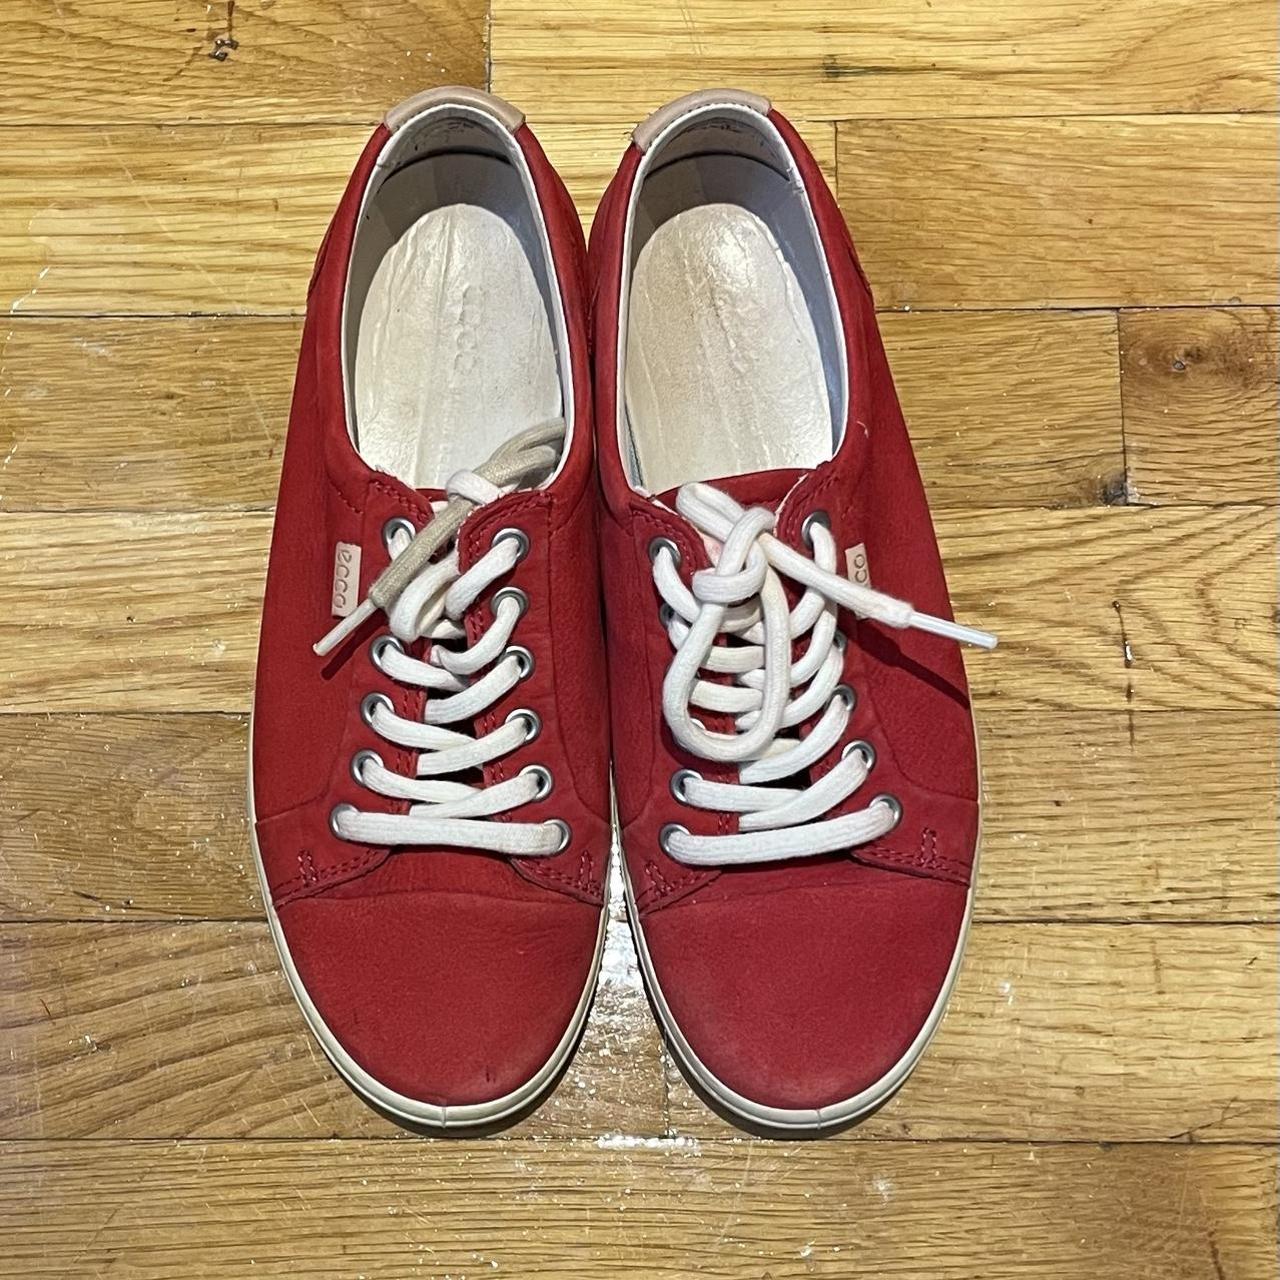 ECCO Women's Red and White Trainers (2)